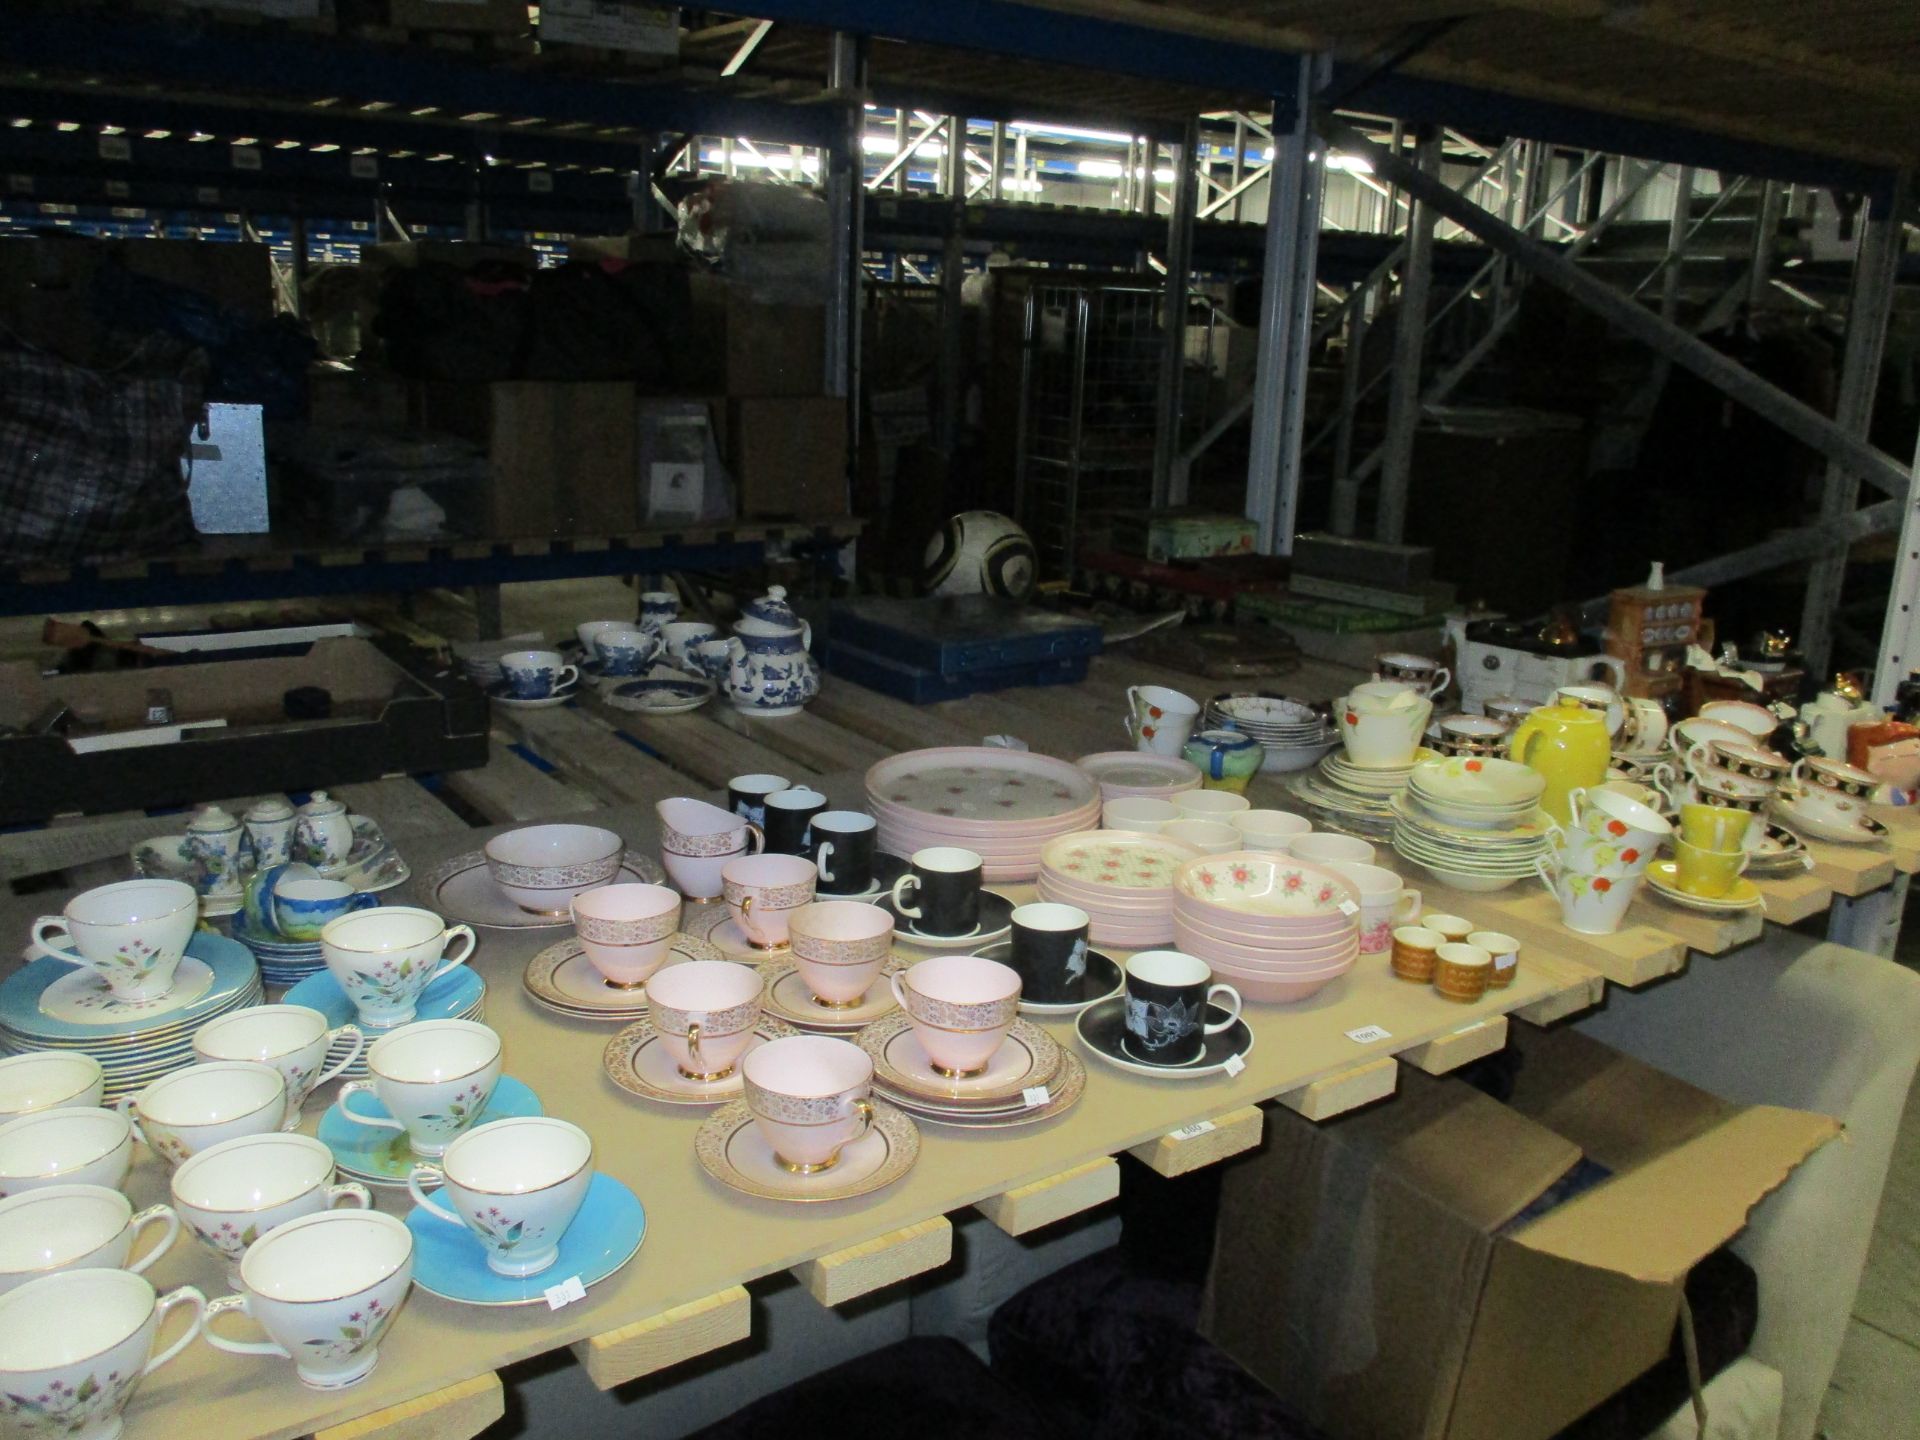 Contents to bay - part tea service - Park Place china, Imperial fine English china, Hornsea Pottery,